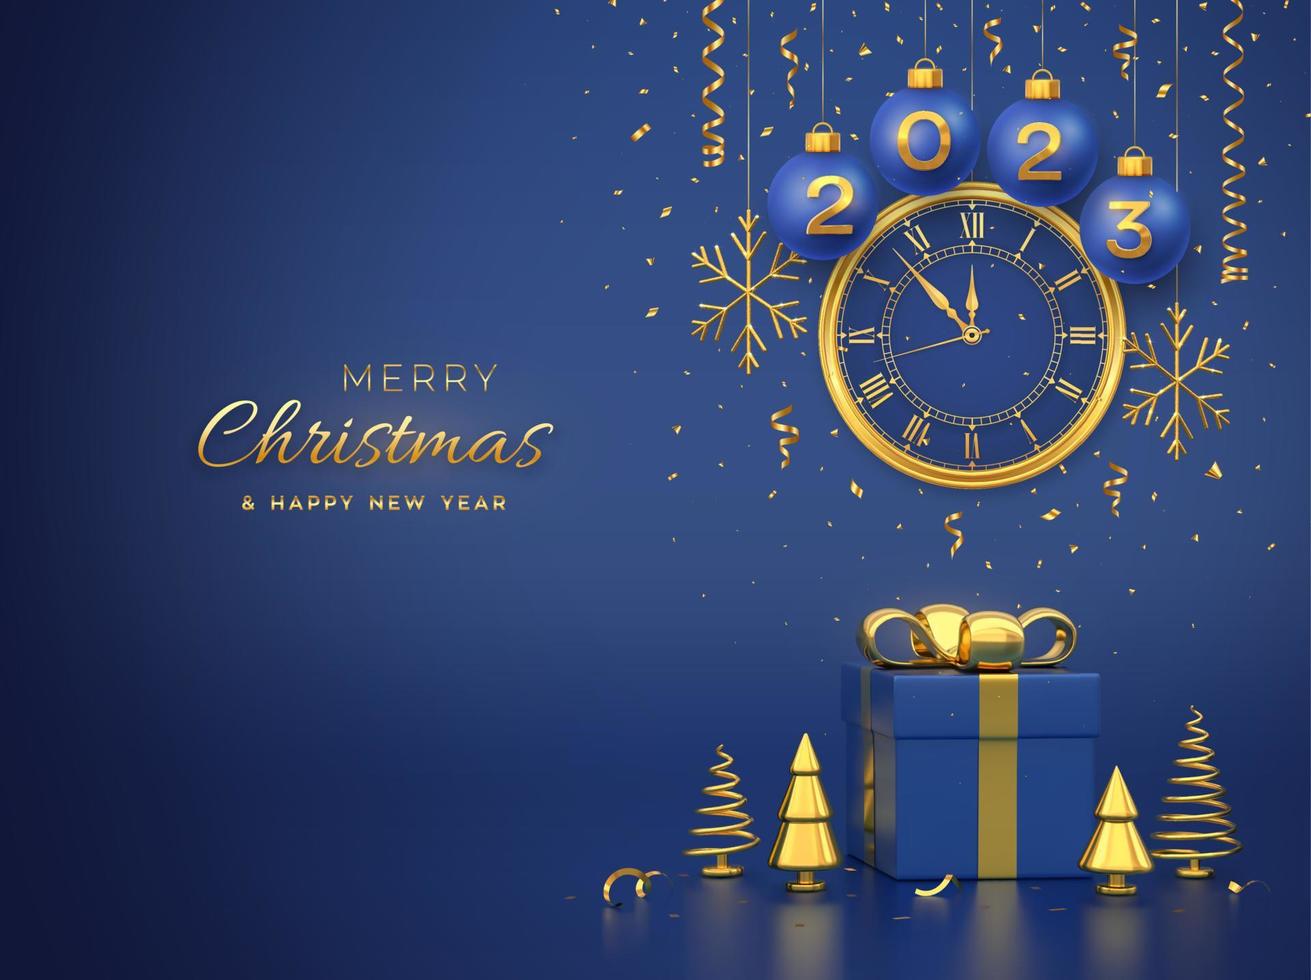 Merry christmas card. Blue Christmas bauble balls with gold 3d numbers 2023, snowflakes. Watch with Roman numeral countdown midnight, eve for New Year. Gift box, golden pine fir spruce trees. Vector. vector